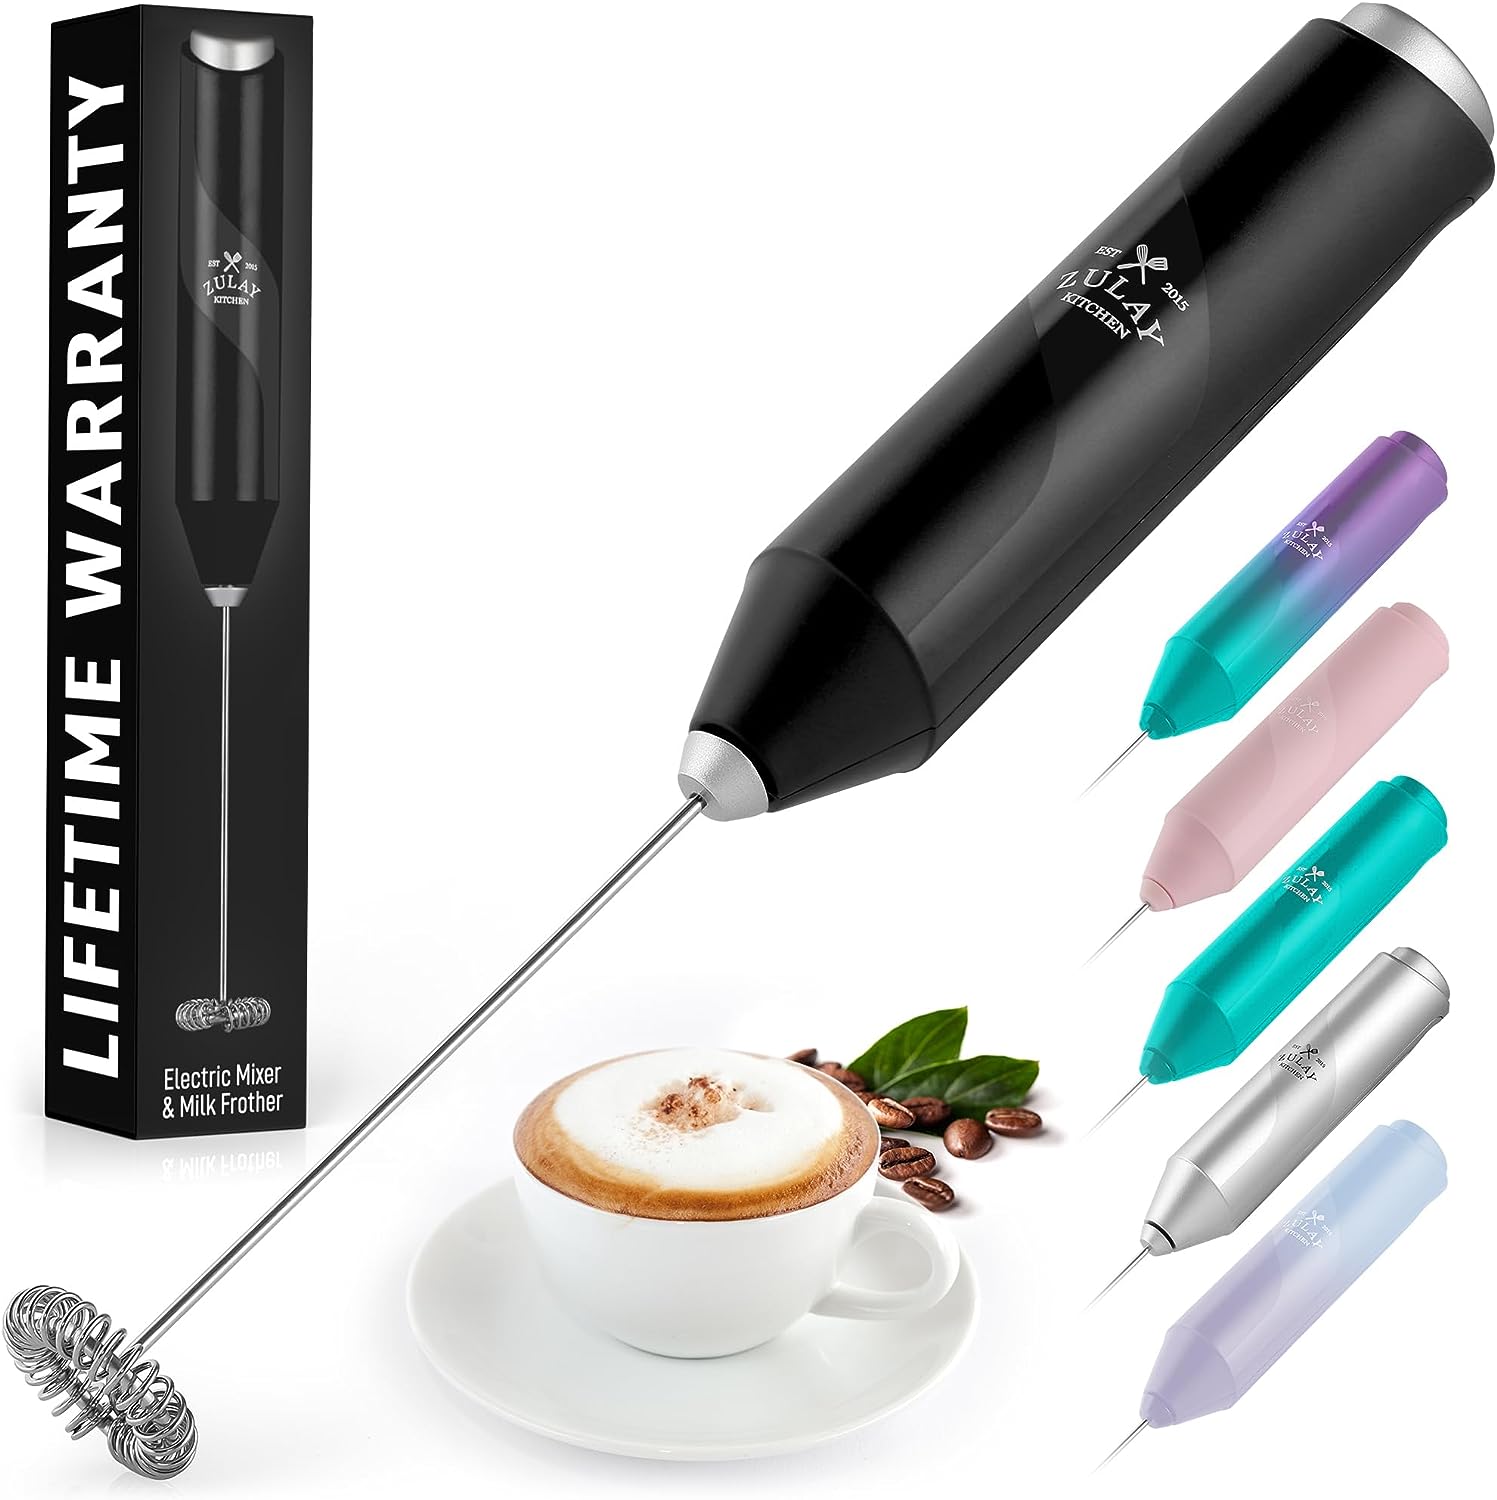 Zulay New Titanium Motor Milk Frother (Without Stand) - Handheld Frother  Whisk, Milk Foamer Frother, Mini Blender for Coffee, Bulletproof Coffee,  Frappe, Latte, Matcha, Budget No Stand - Black 